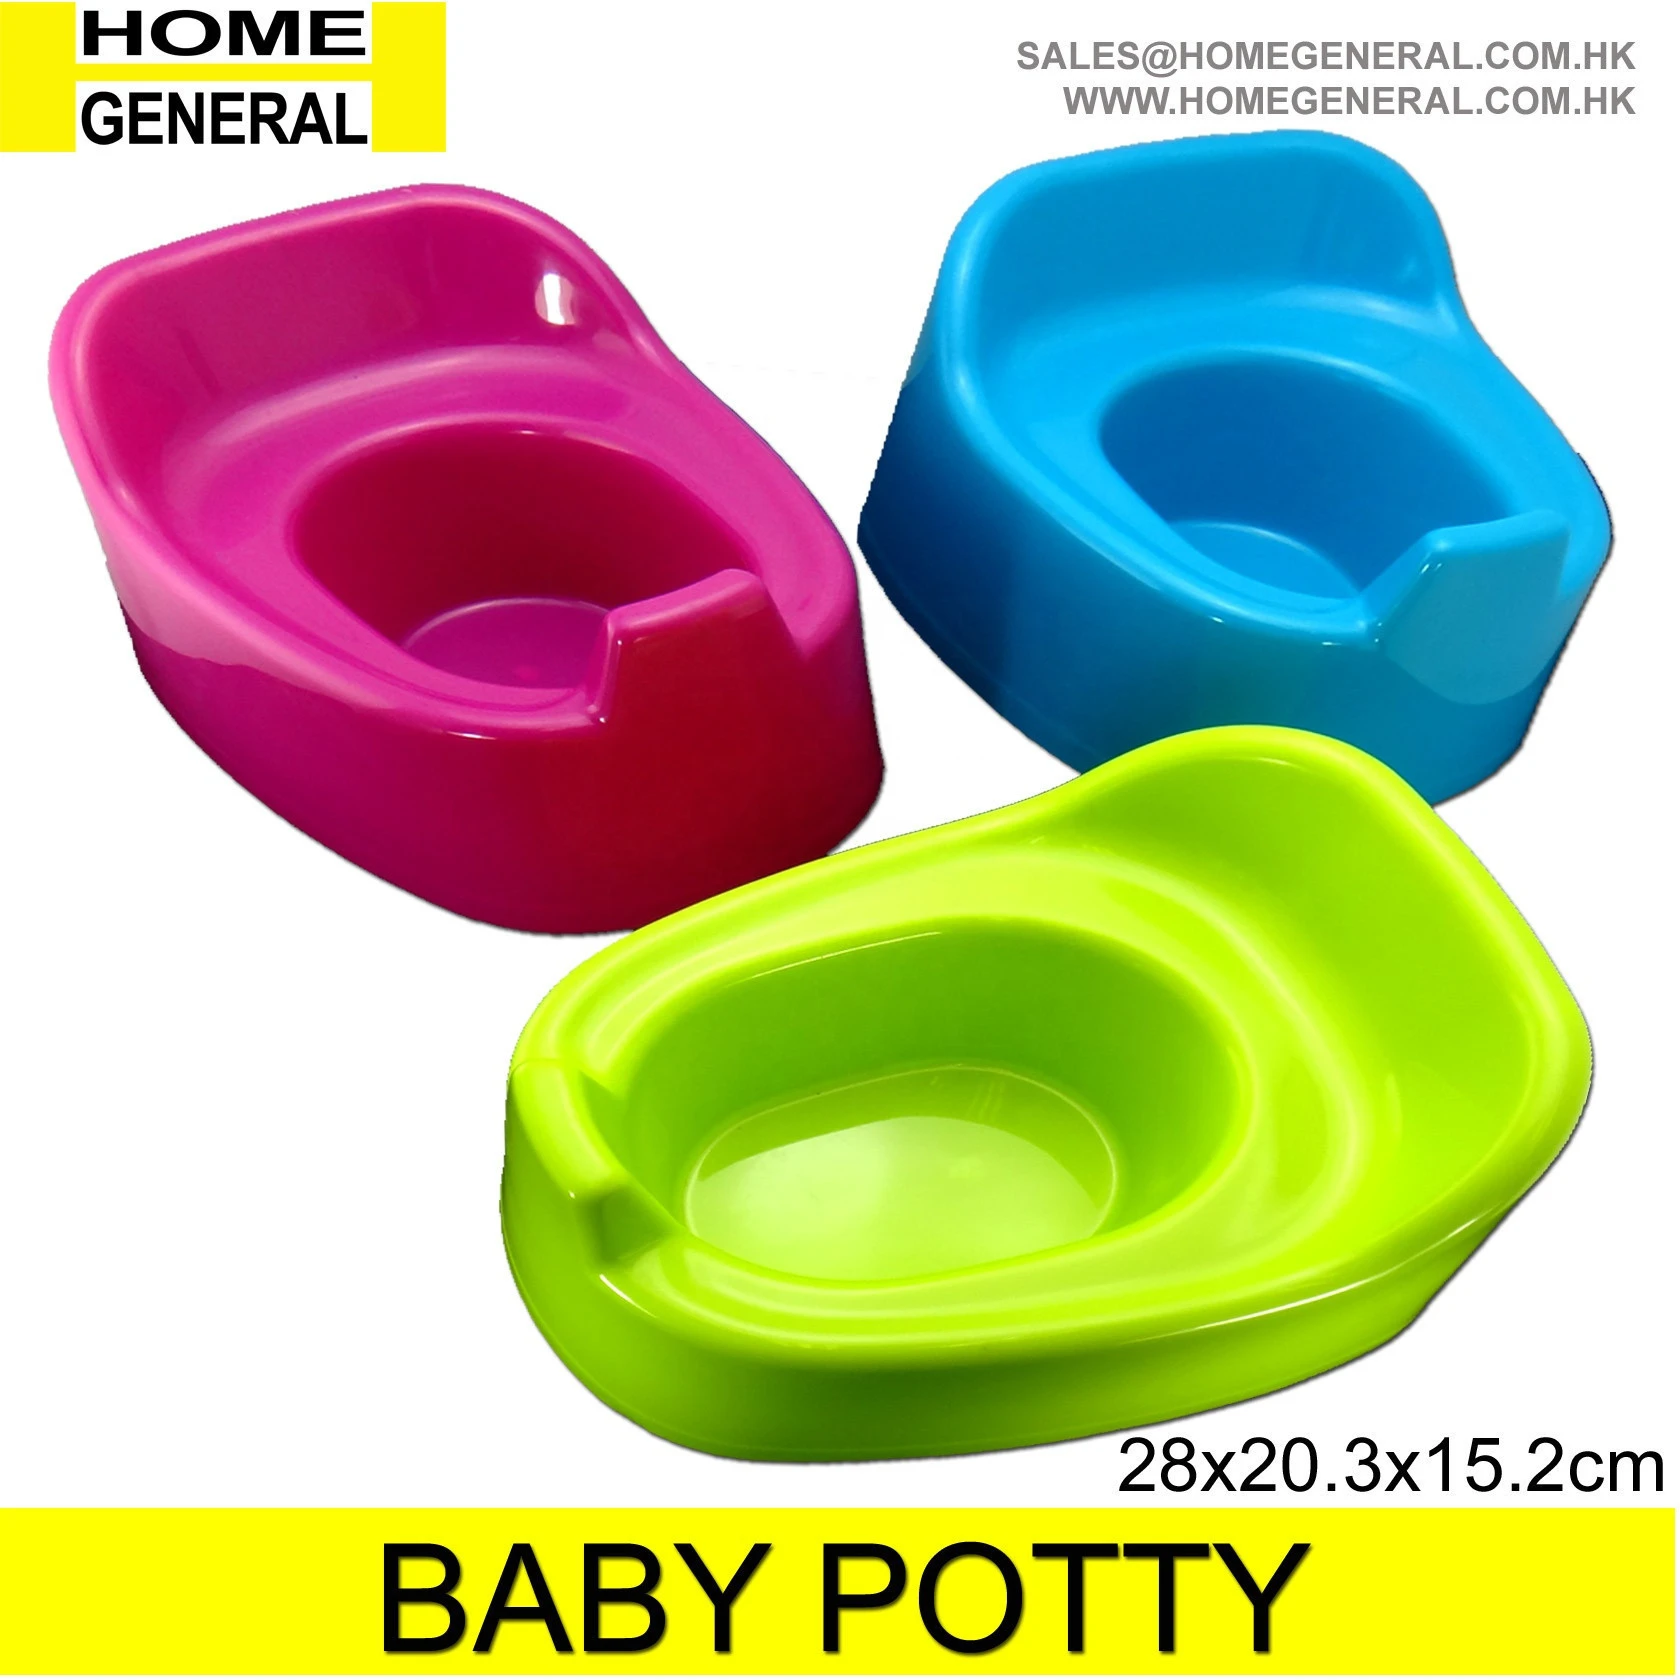 POTTY TRAINING SEAT | TODDLER TOILET TRAINER | BABY KIDS POTTY | TOILET FOR CHILD BOYS GIRLS WITHOUT HANDLES, NON-LADDER, NO STO